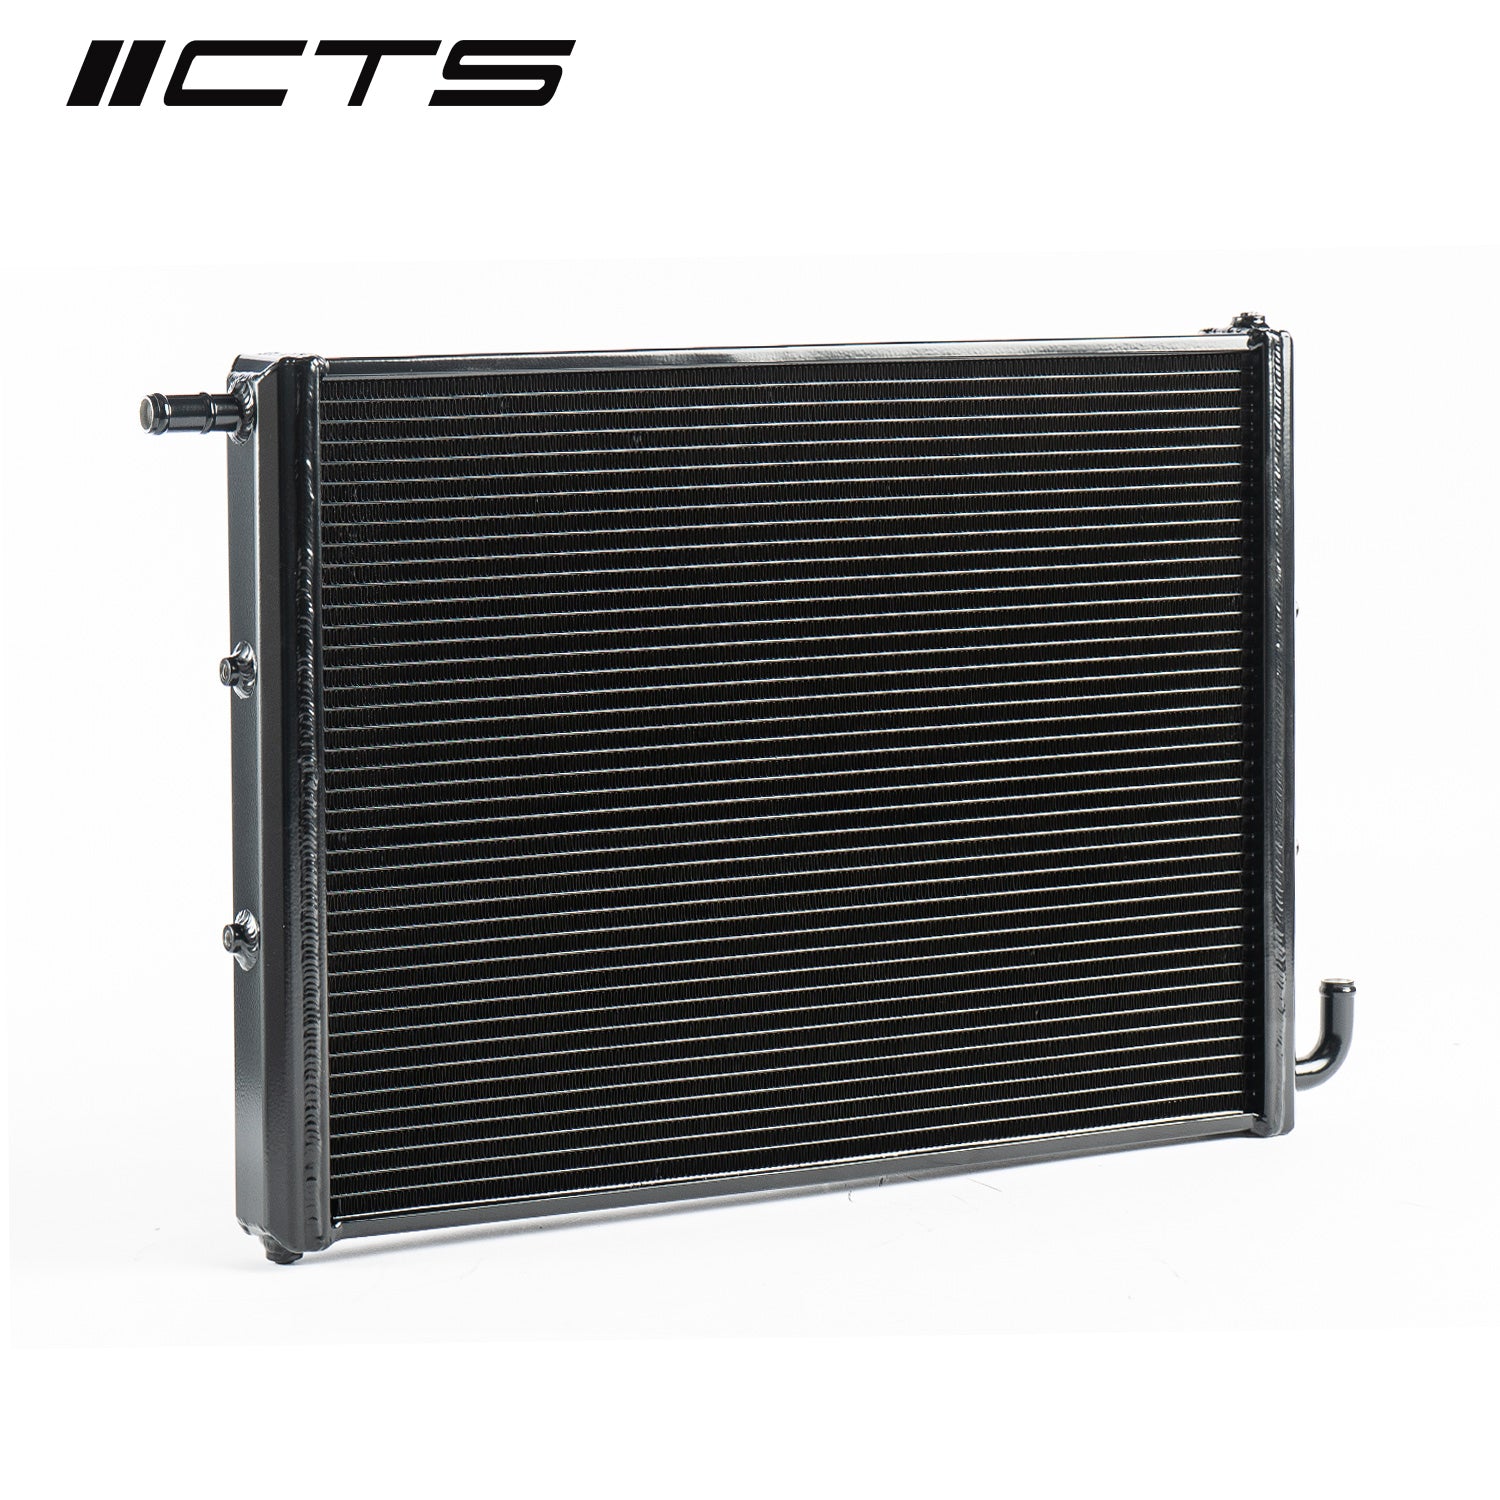 CTS TURBO C7 AUDI A6/A7 3.0T AND S6/S7 4.0T HEAT EXCHANGER UPGRADE